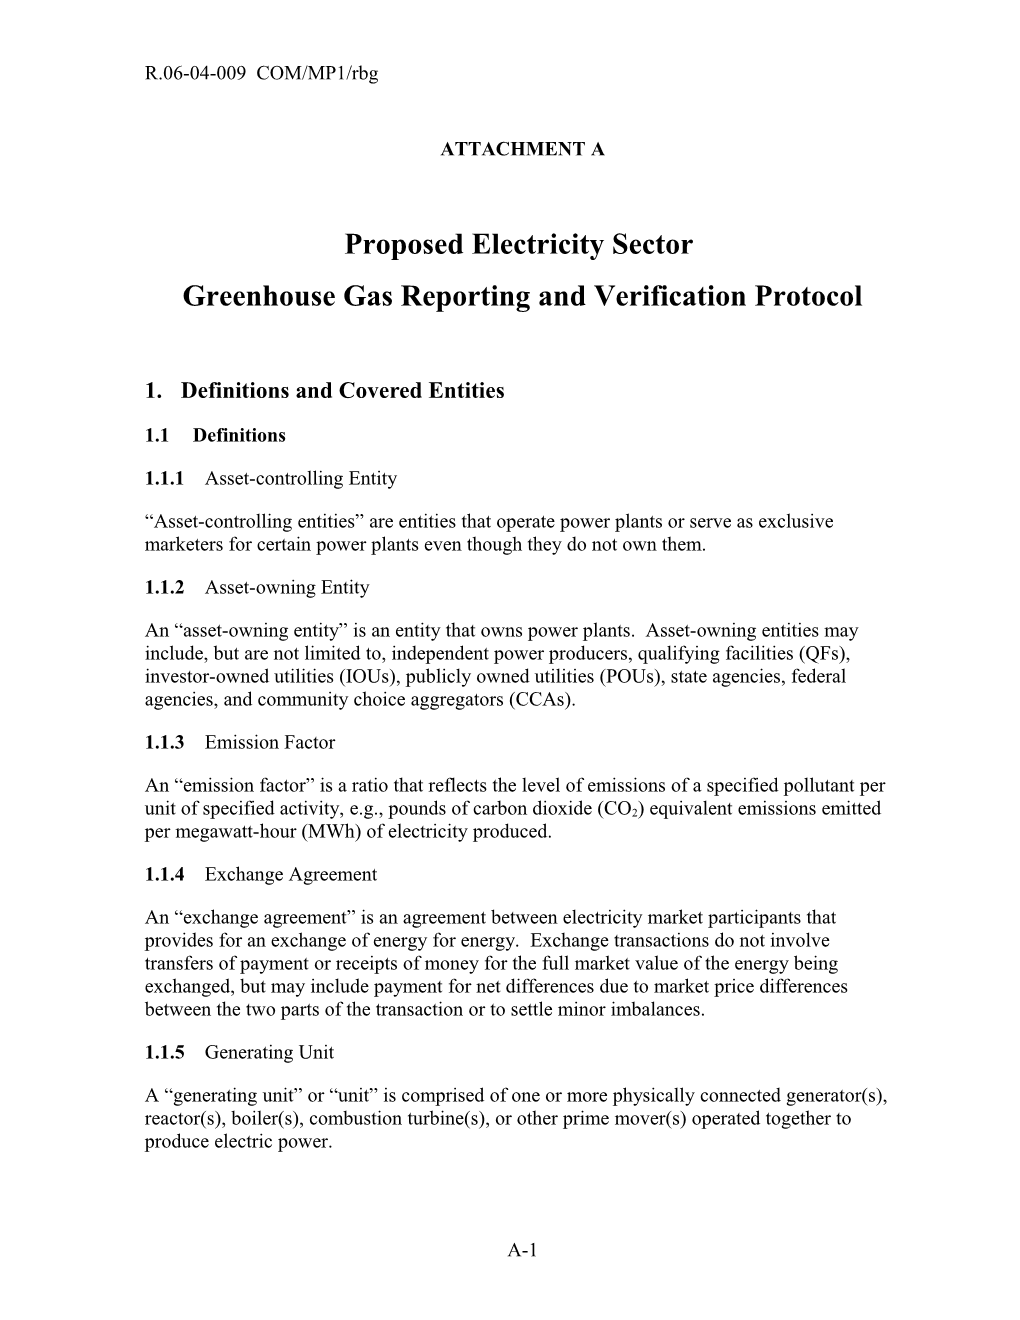 Greenhouse Gas Reporting and Verification Protocol